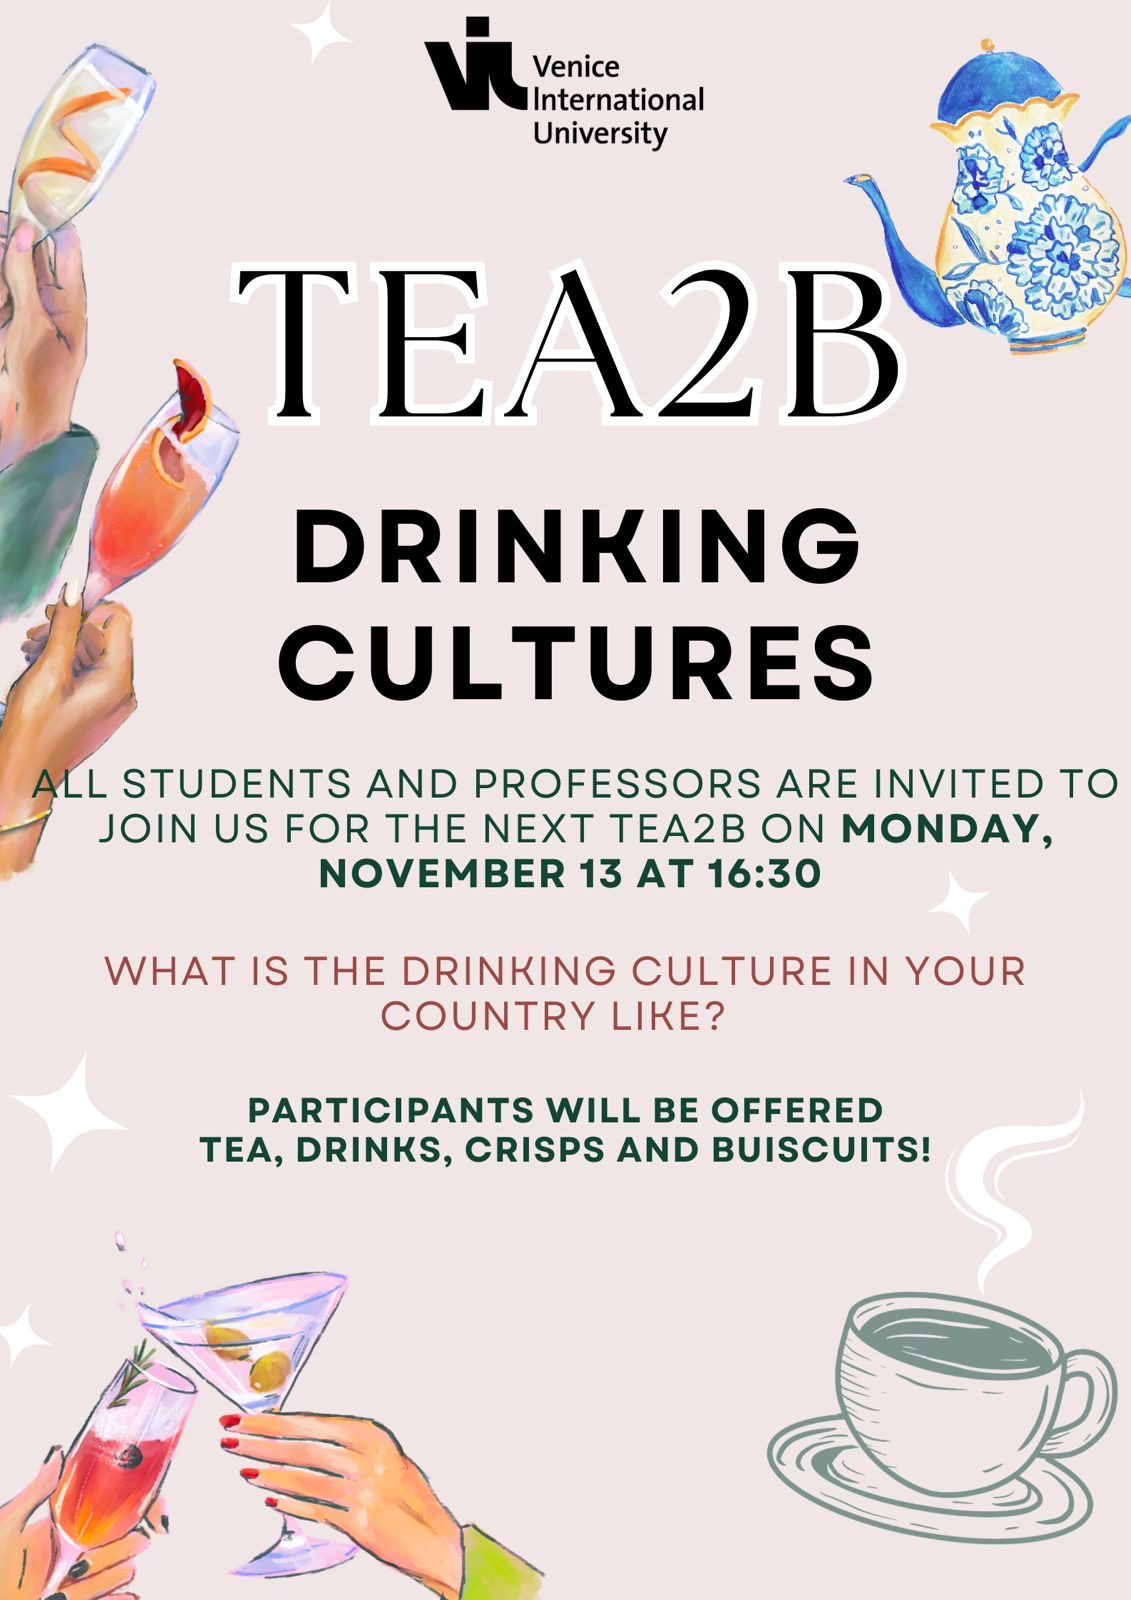 drinking cultures image